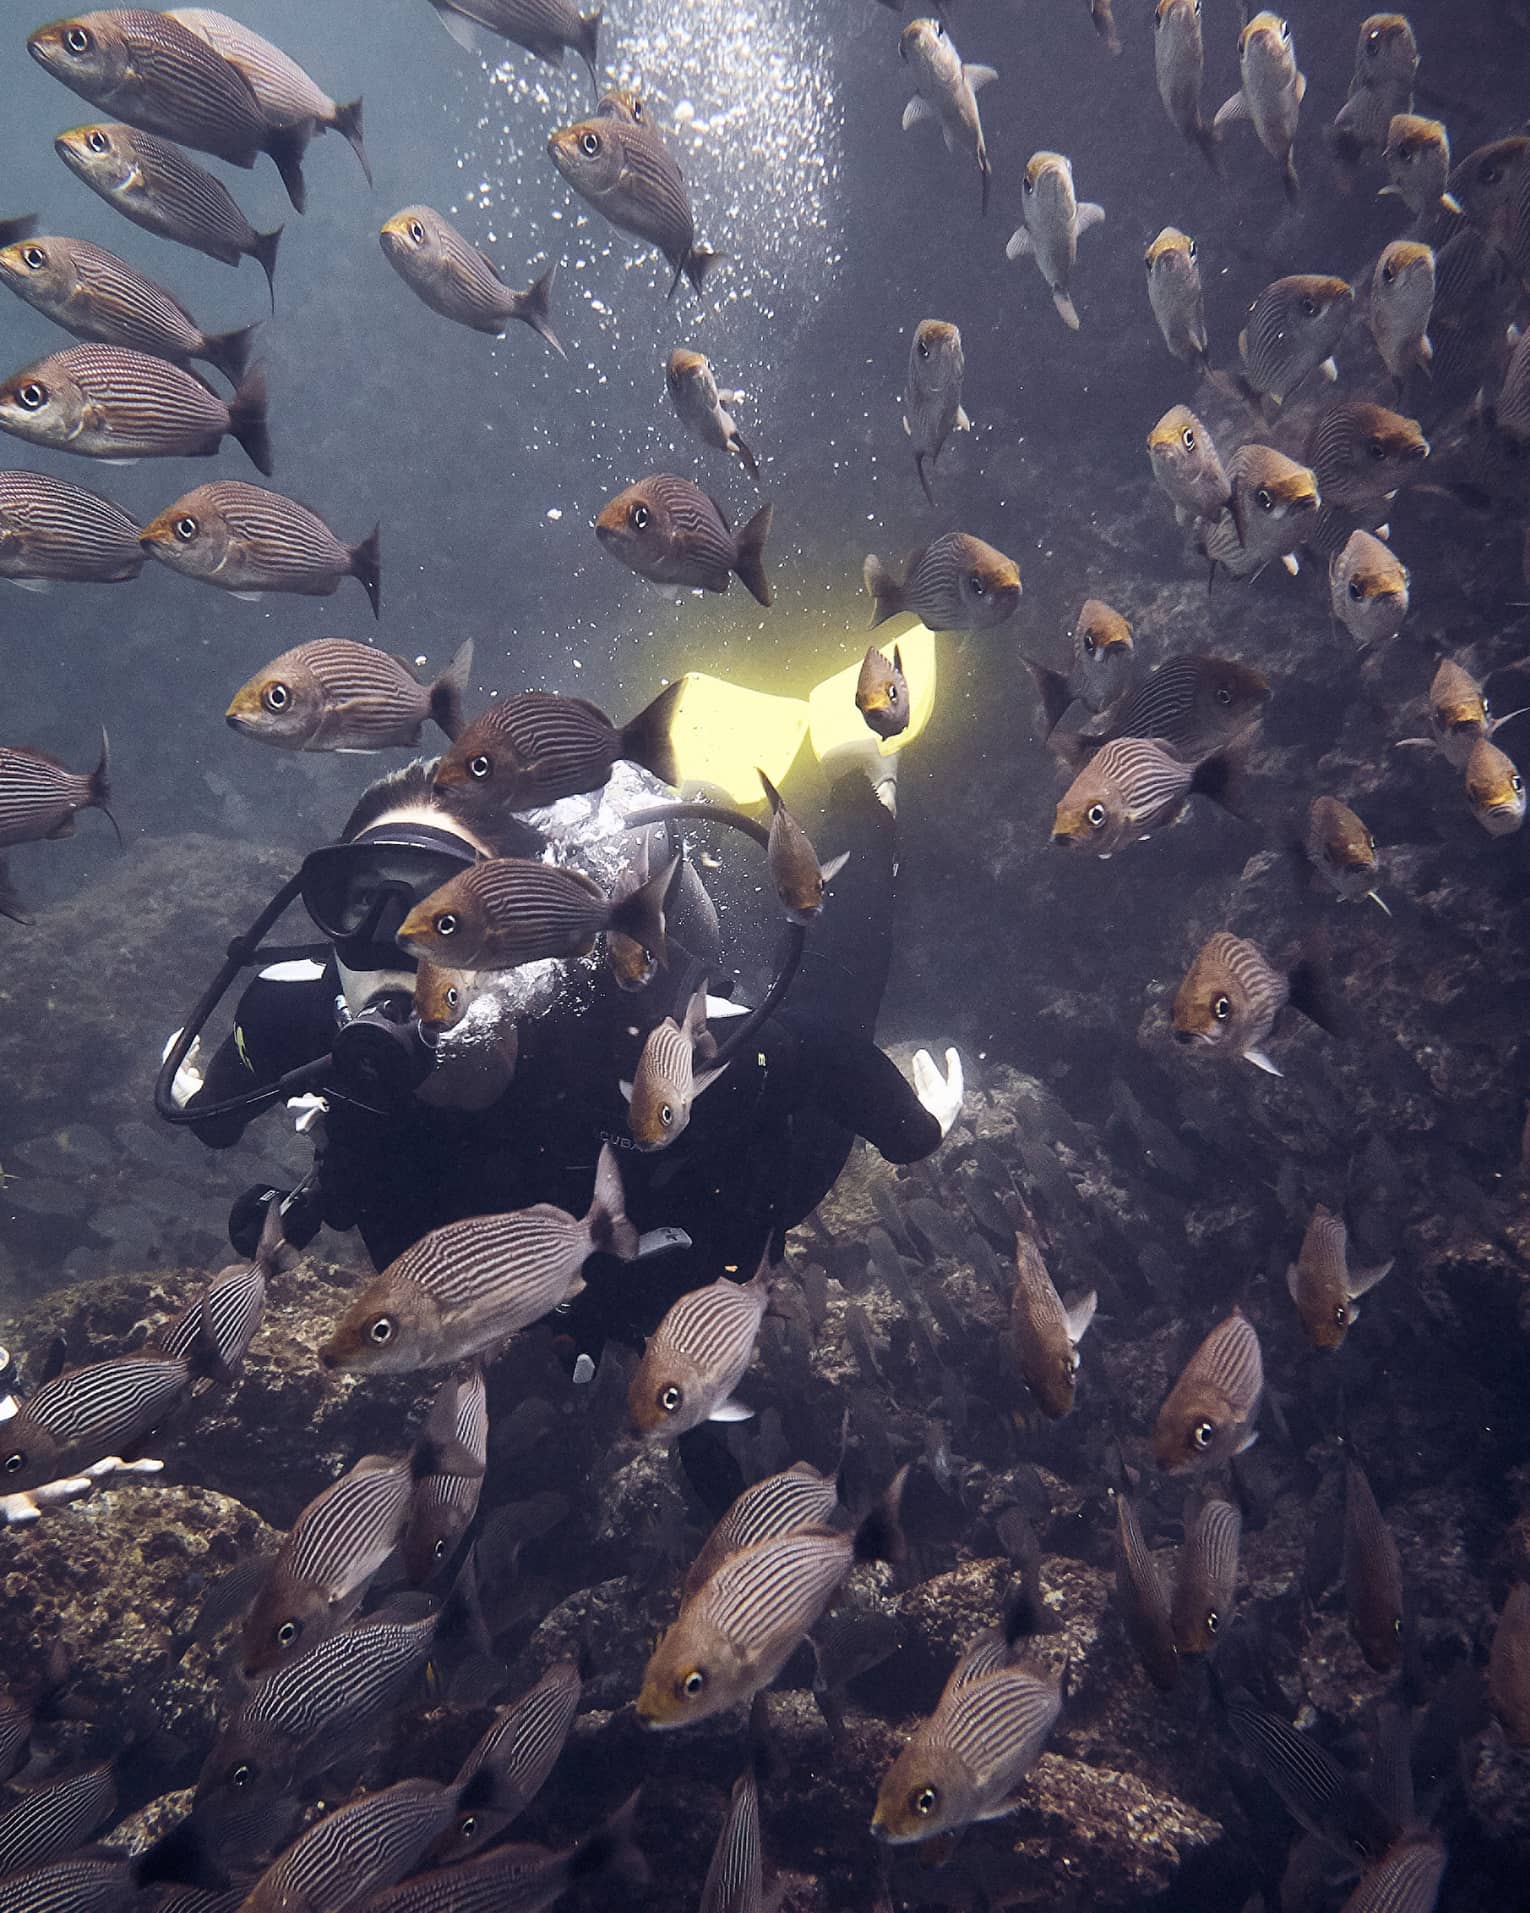 A scuba diver surrounded by fish.